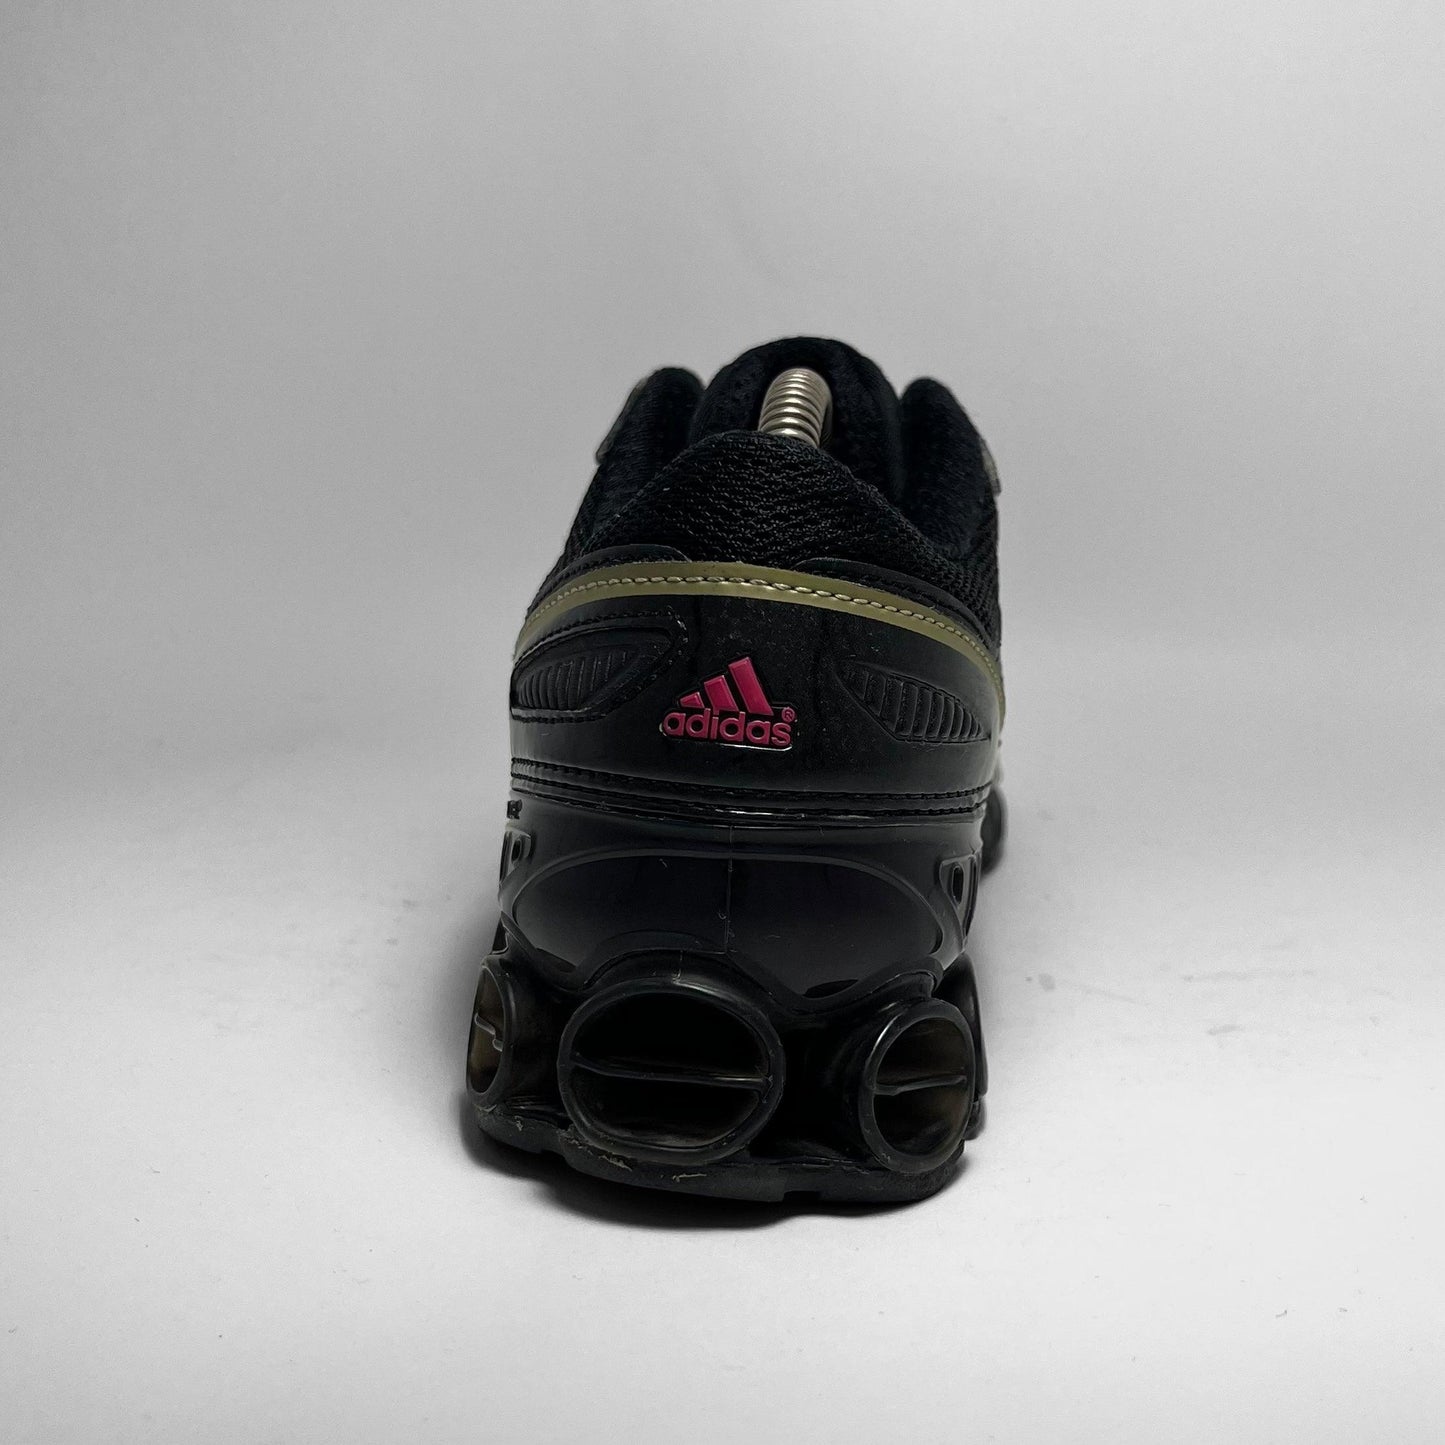 Adidas Bounce (2000s) - Known Source